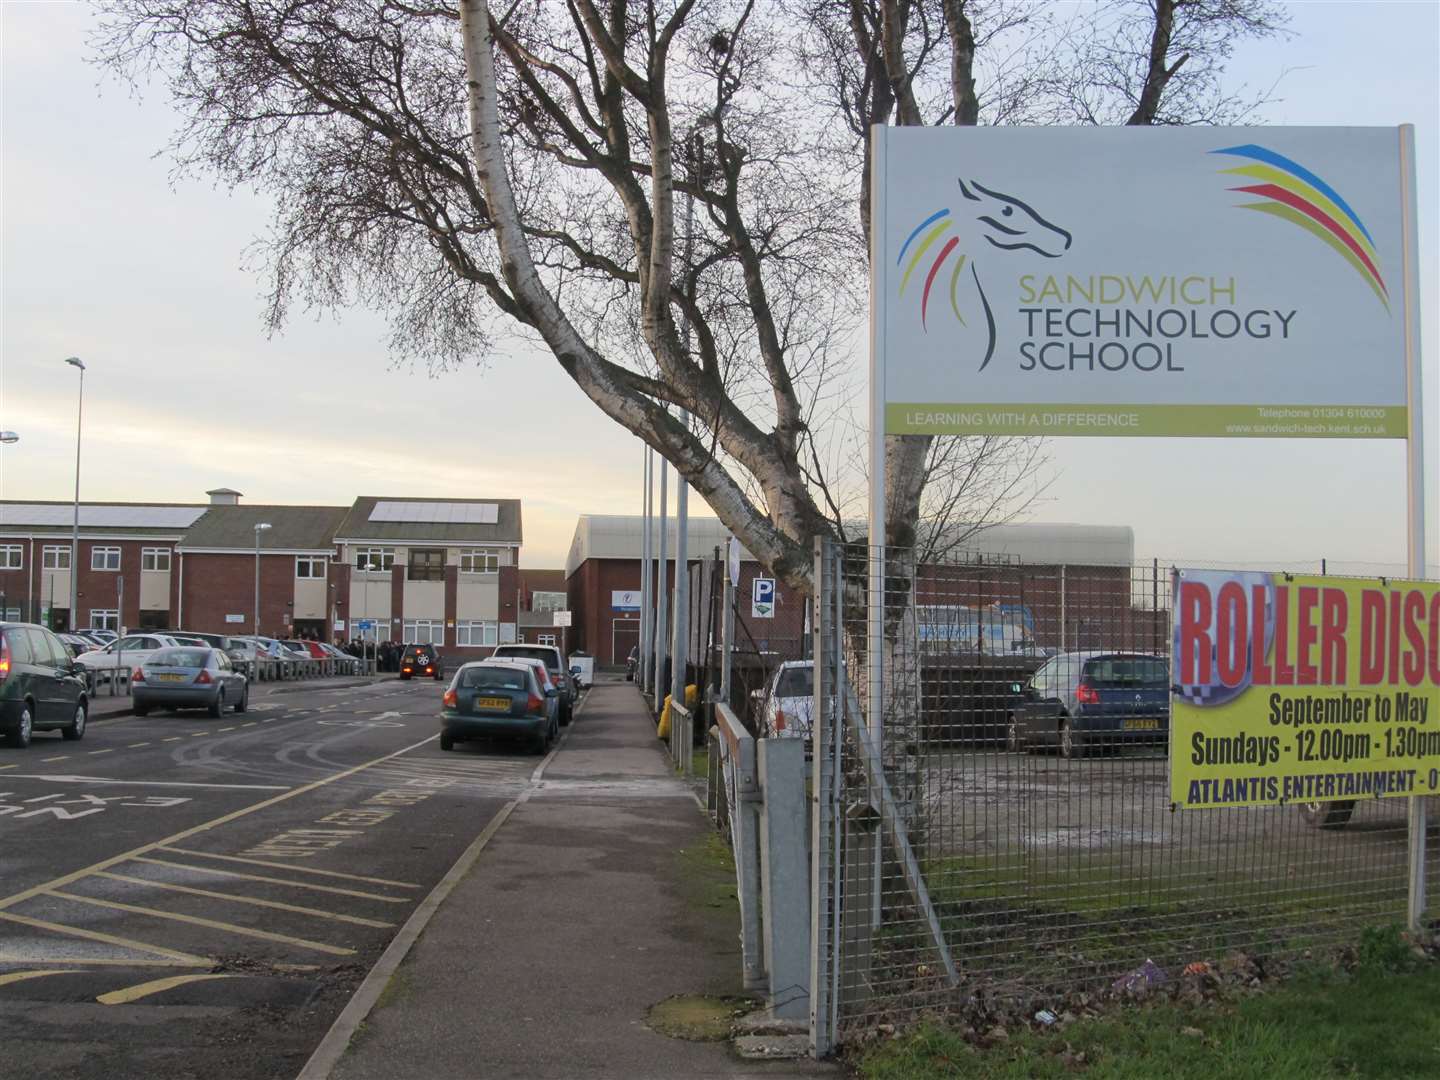 Sandwich Technology School (left) along with the leisure centre (right) which is now owned by the school.